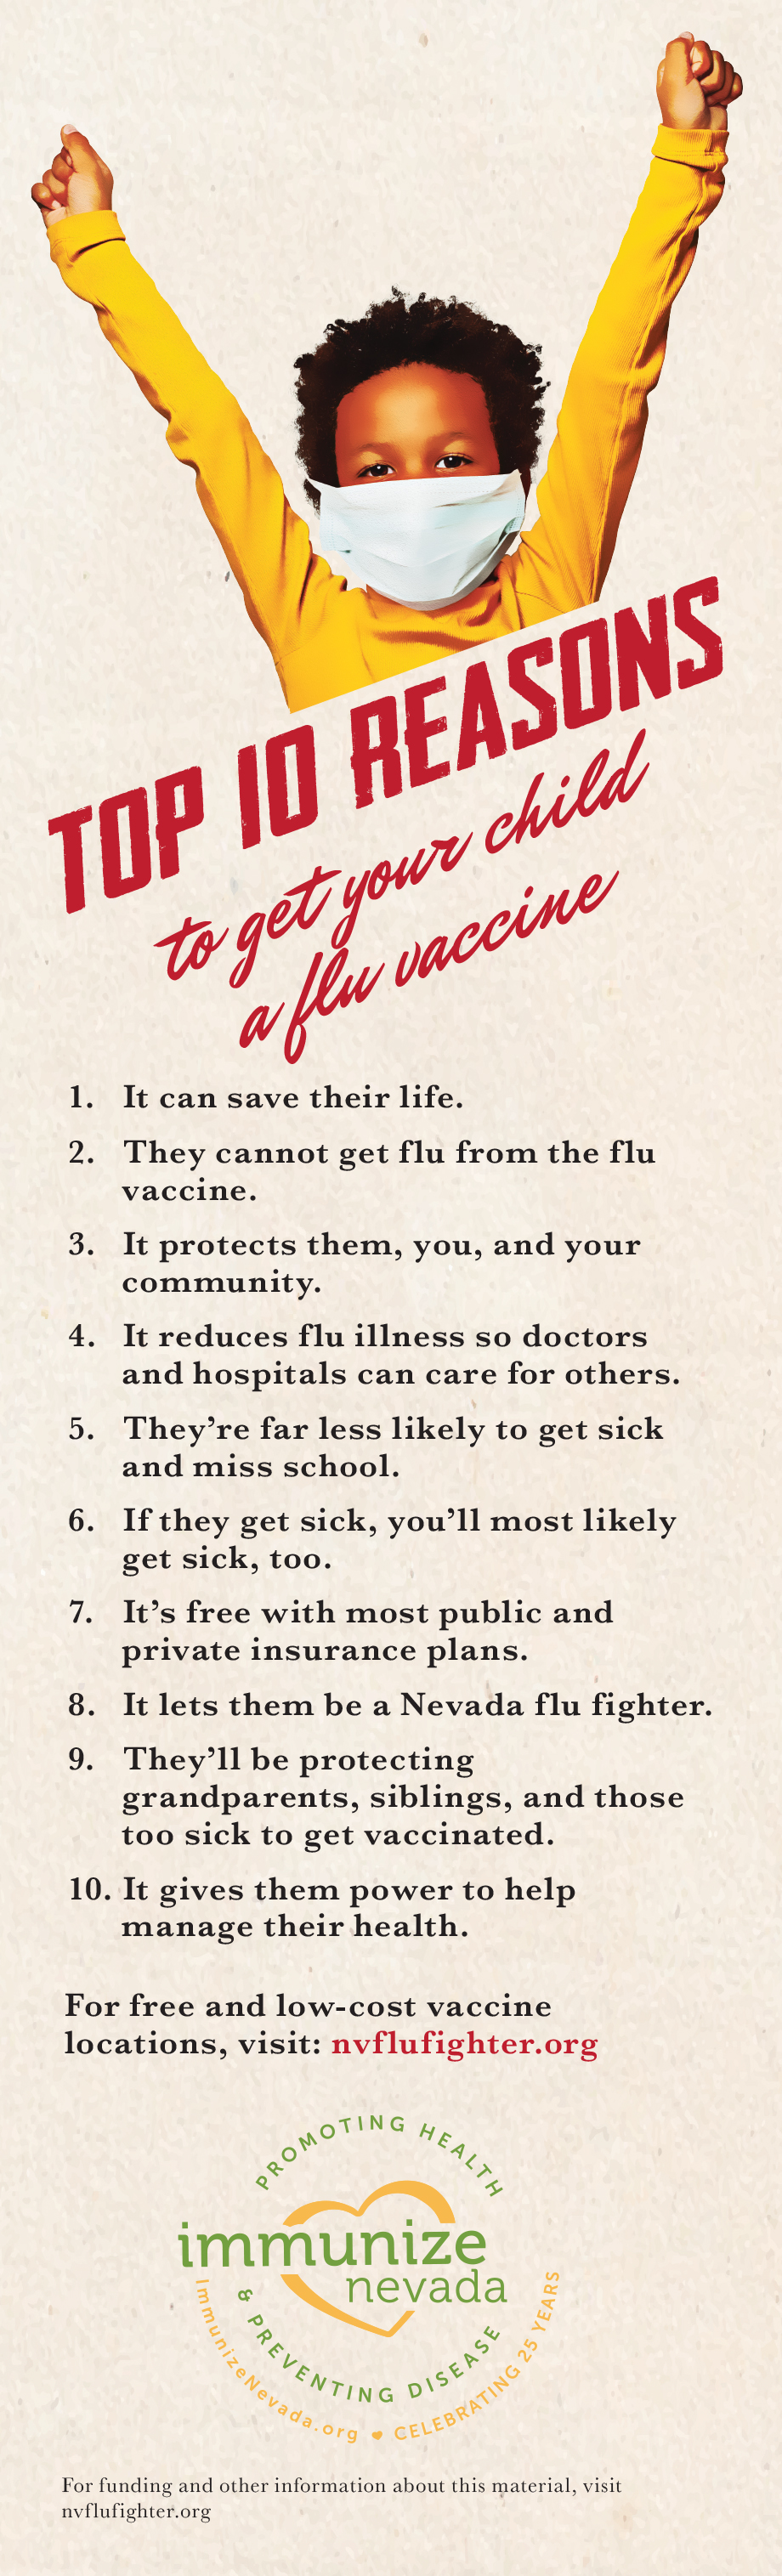 top 10 reasons to get a Flu vaccine bookmark